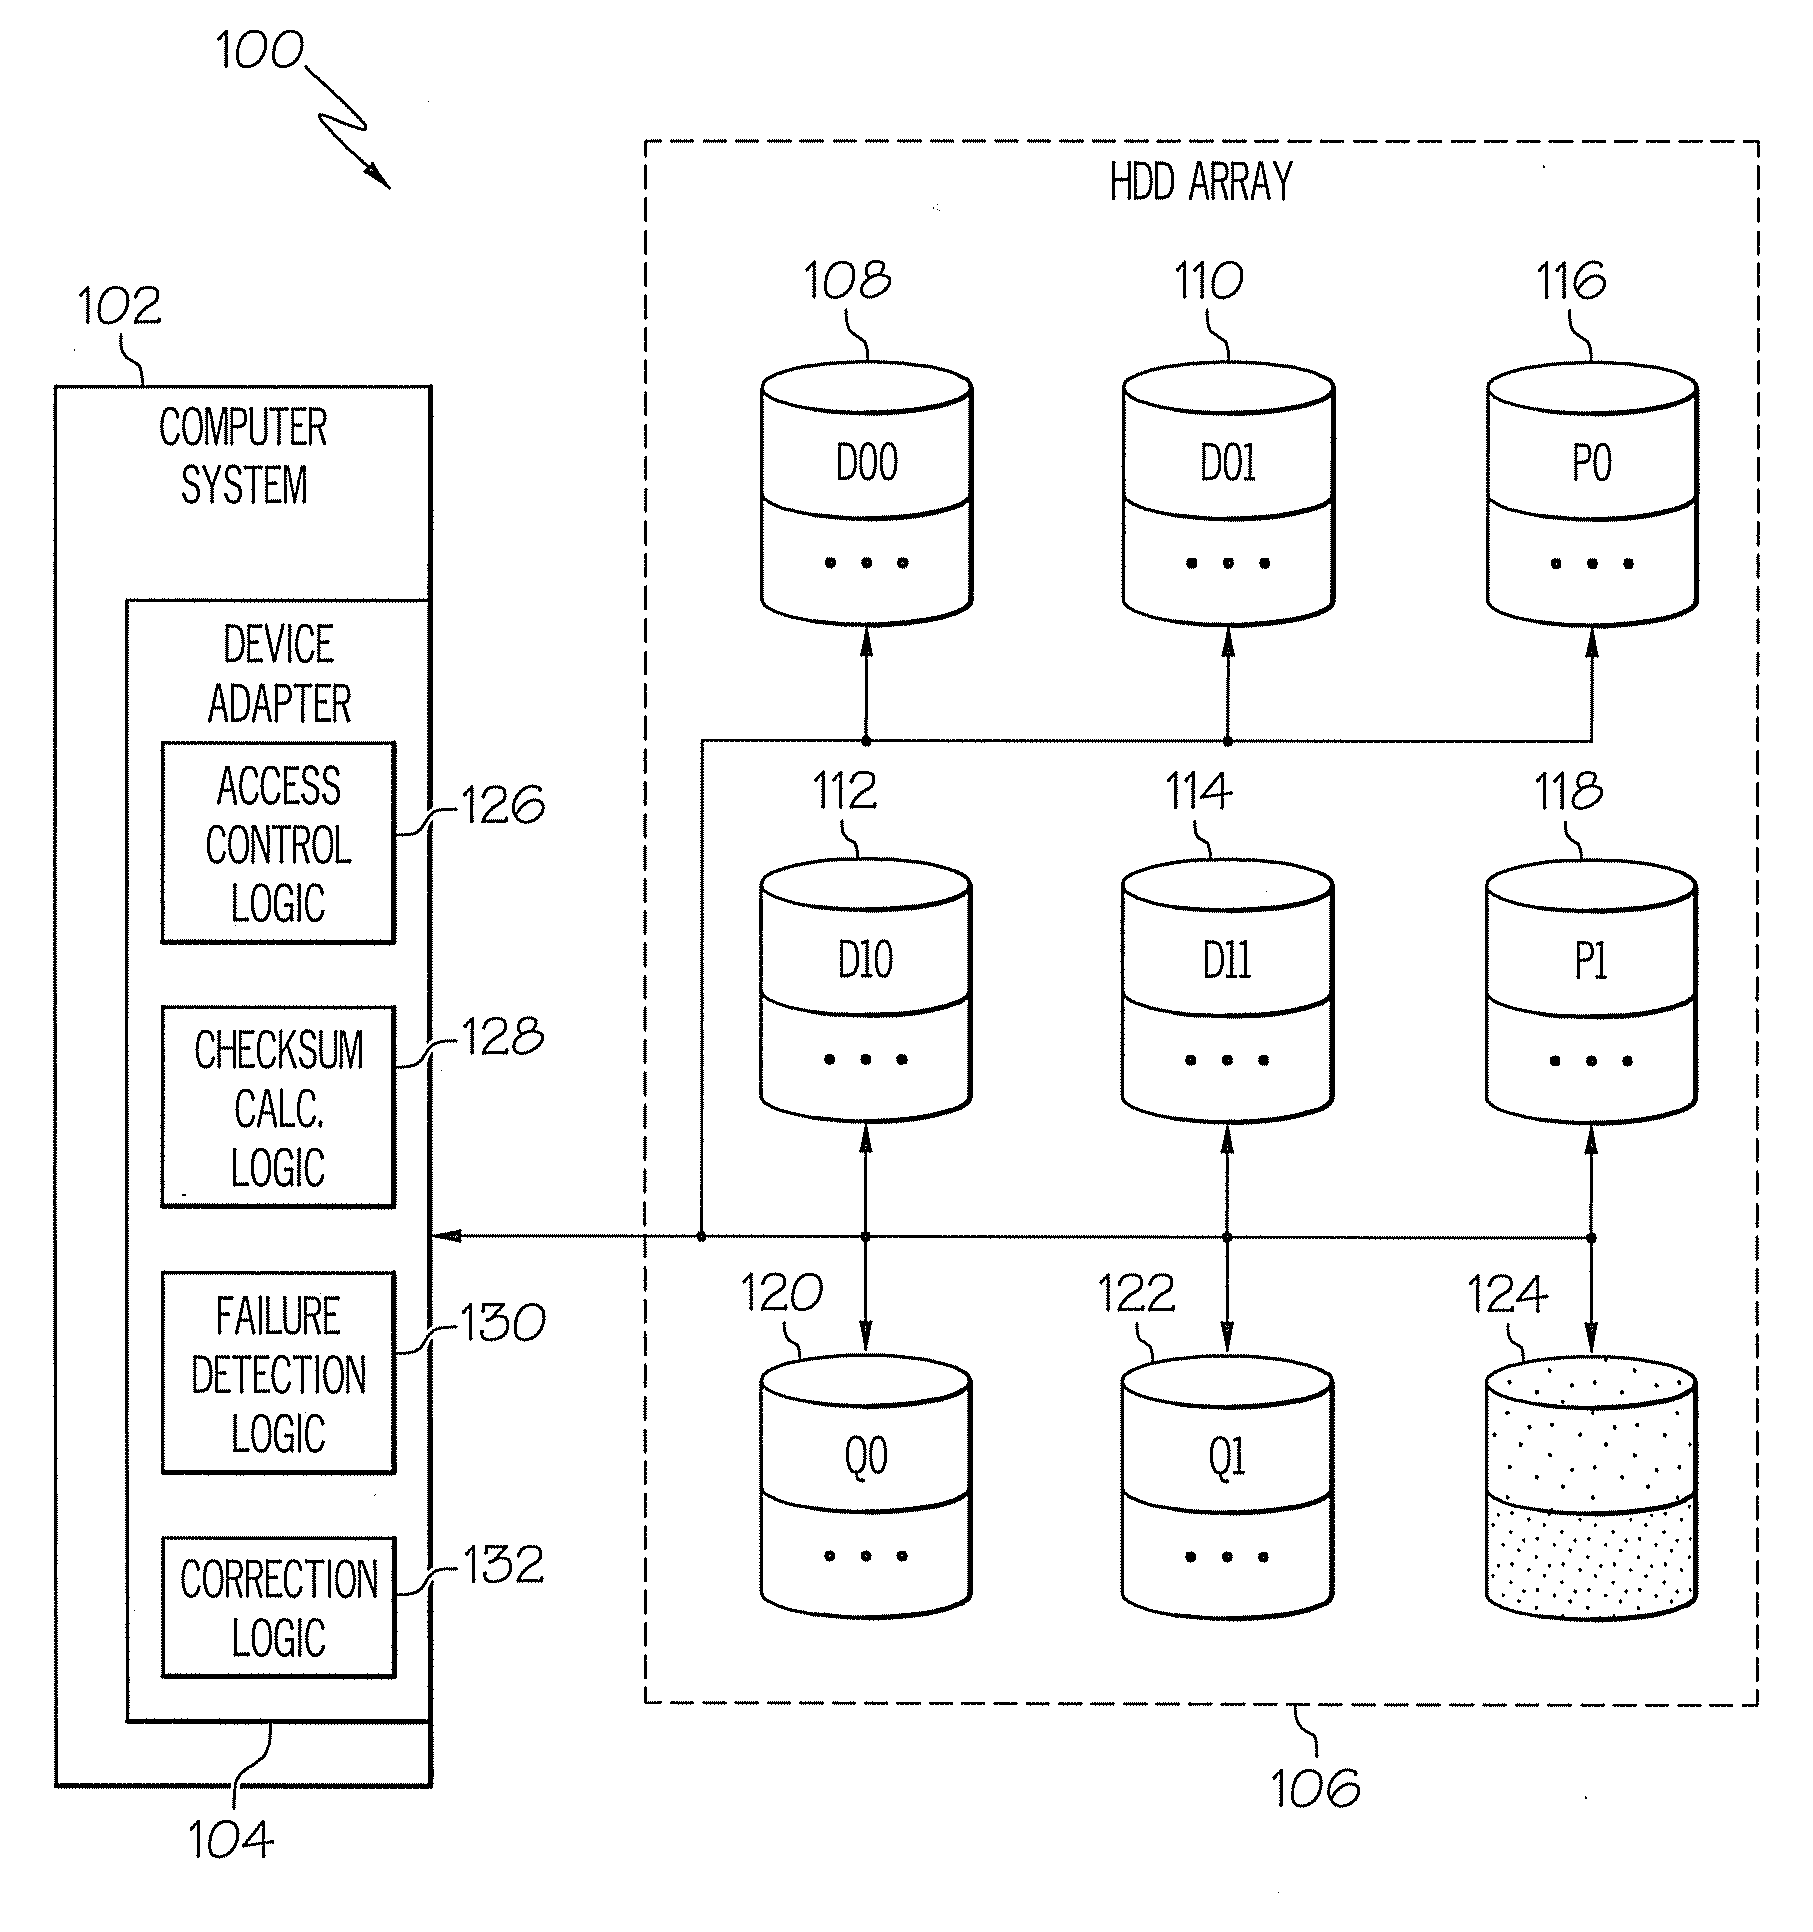 Providing enhanced tolerance of data loss in a disk array system